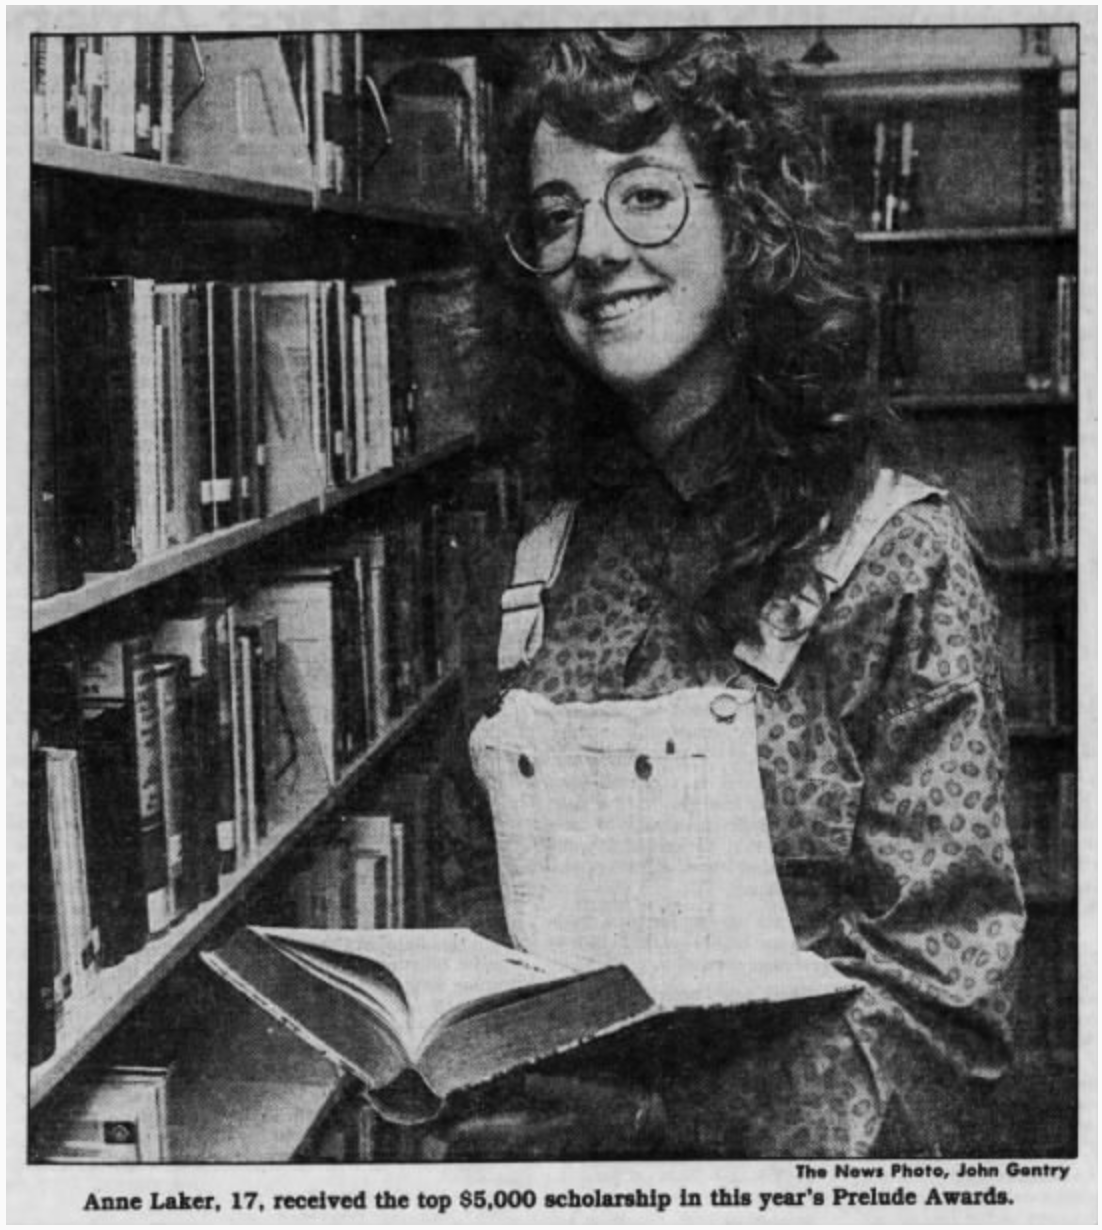 A woman stands in front of a book shelf. She is holding an open book and smiling at the camera.